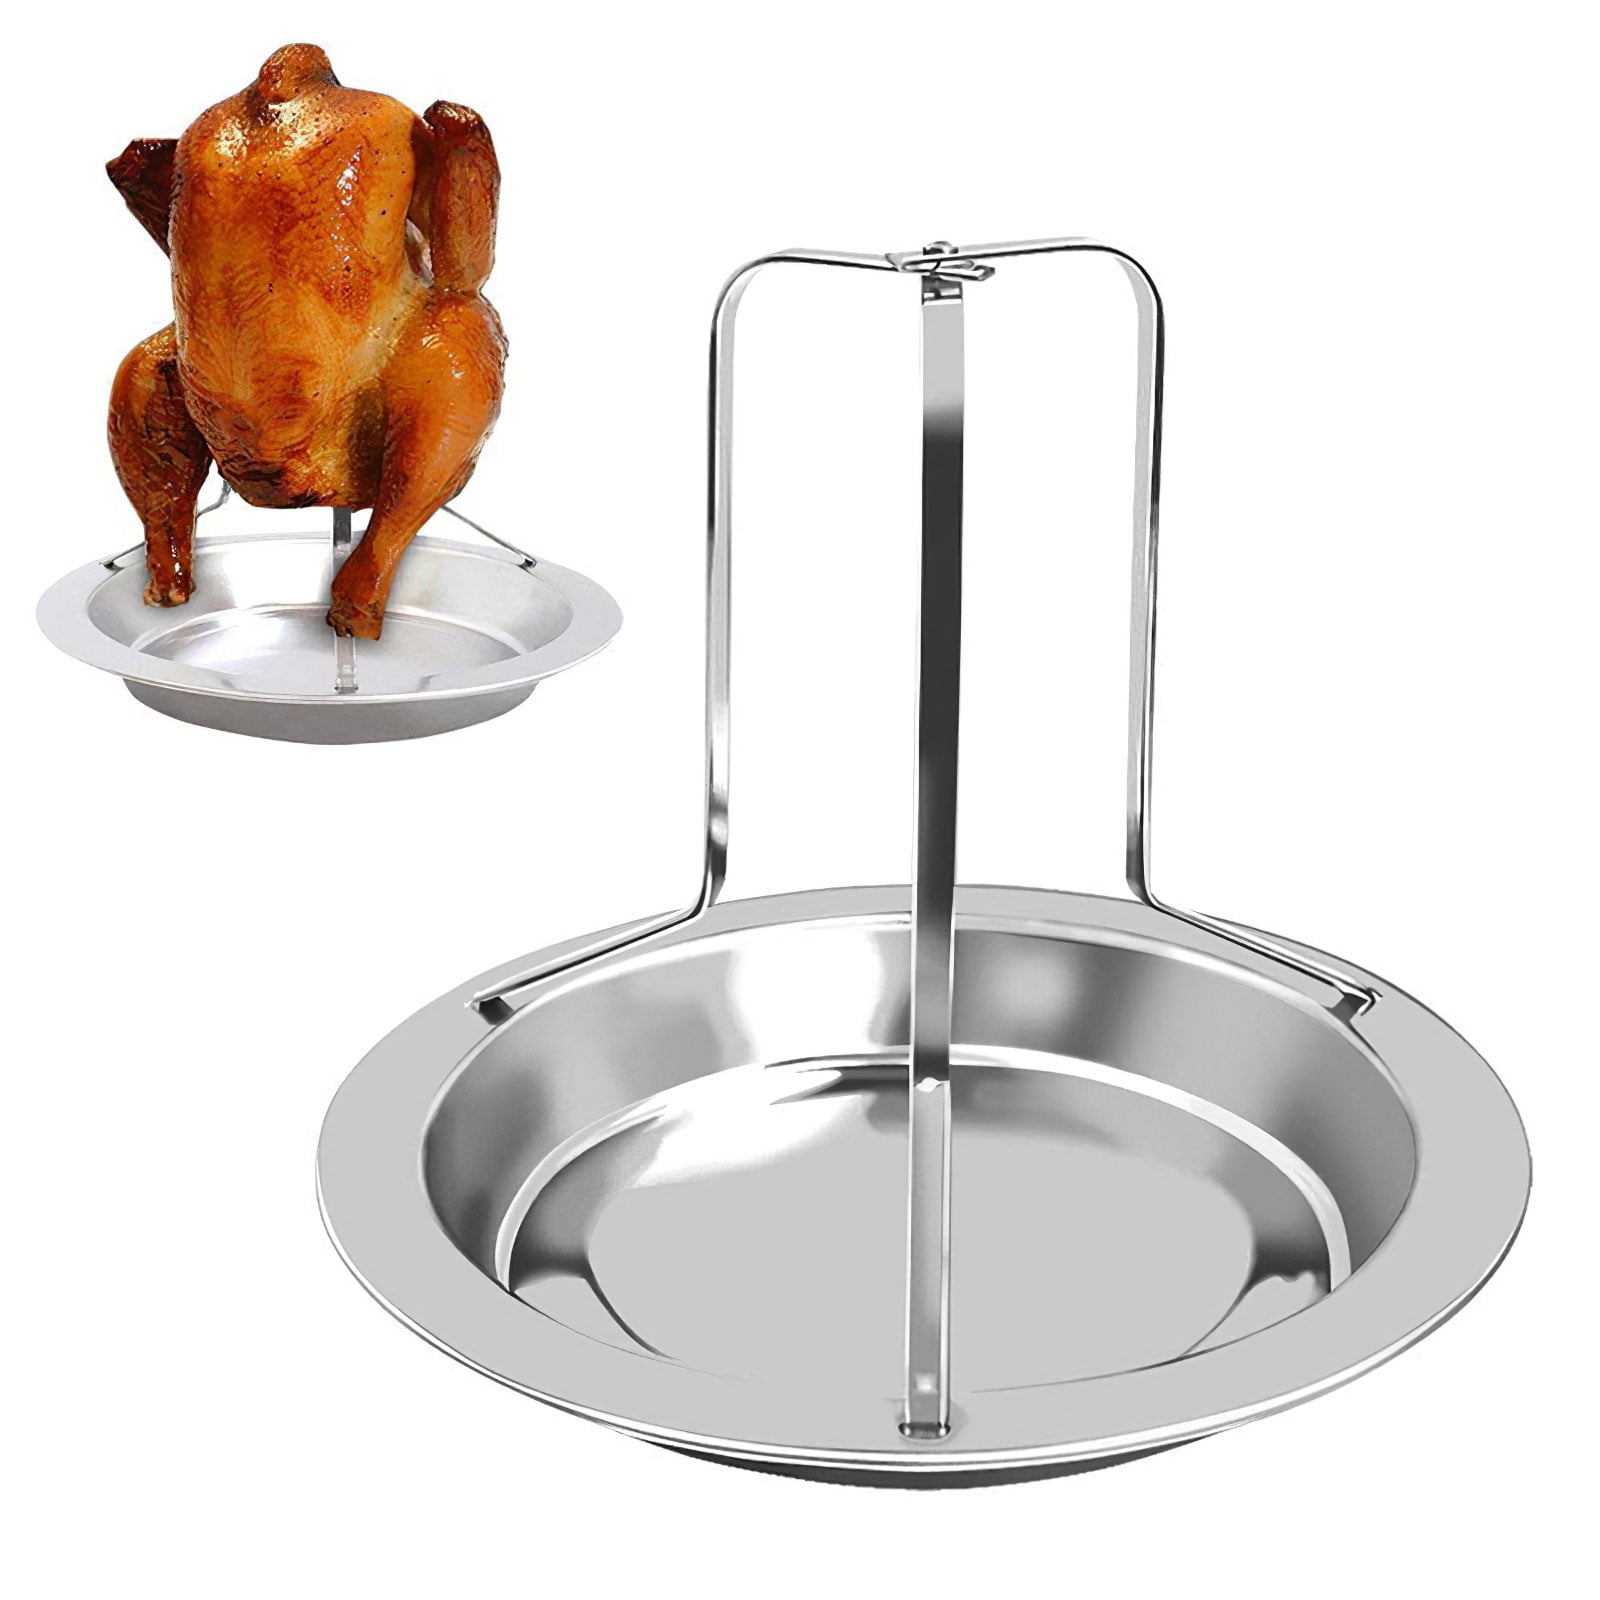 BBQ Vertical Chicken Duck Grill Roast Baking Roaster Rack Stand Steel Carbo  NEW 